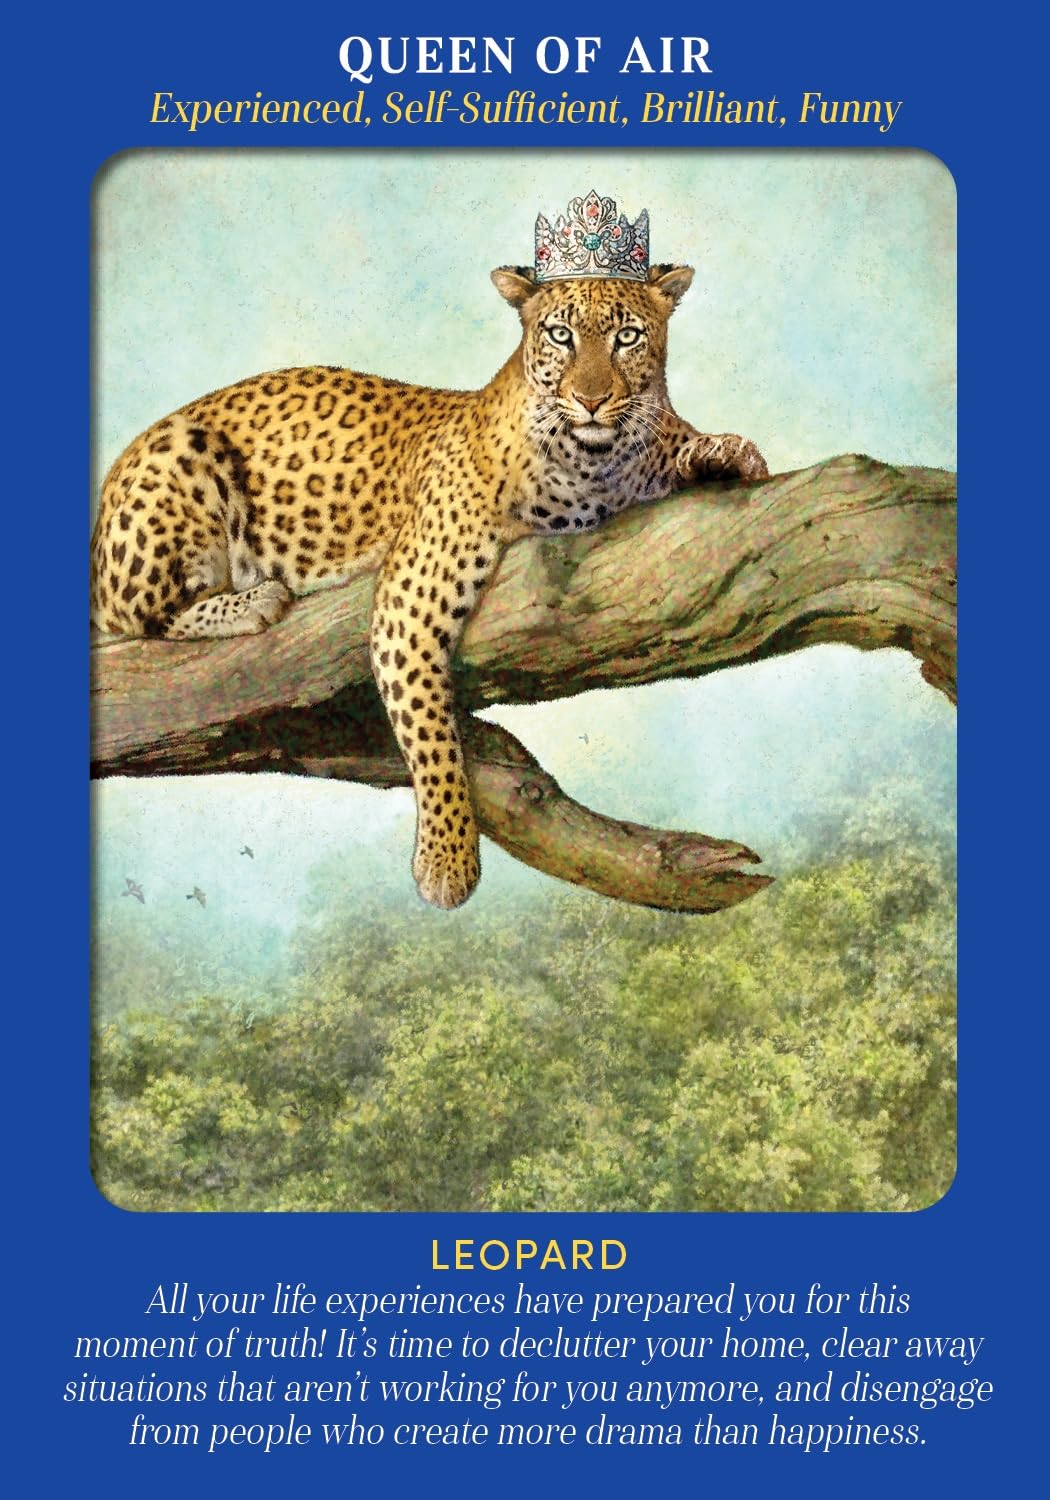 Animal Guides Tarot: A 78-Card Deck and Guidebook